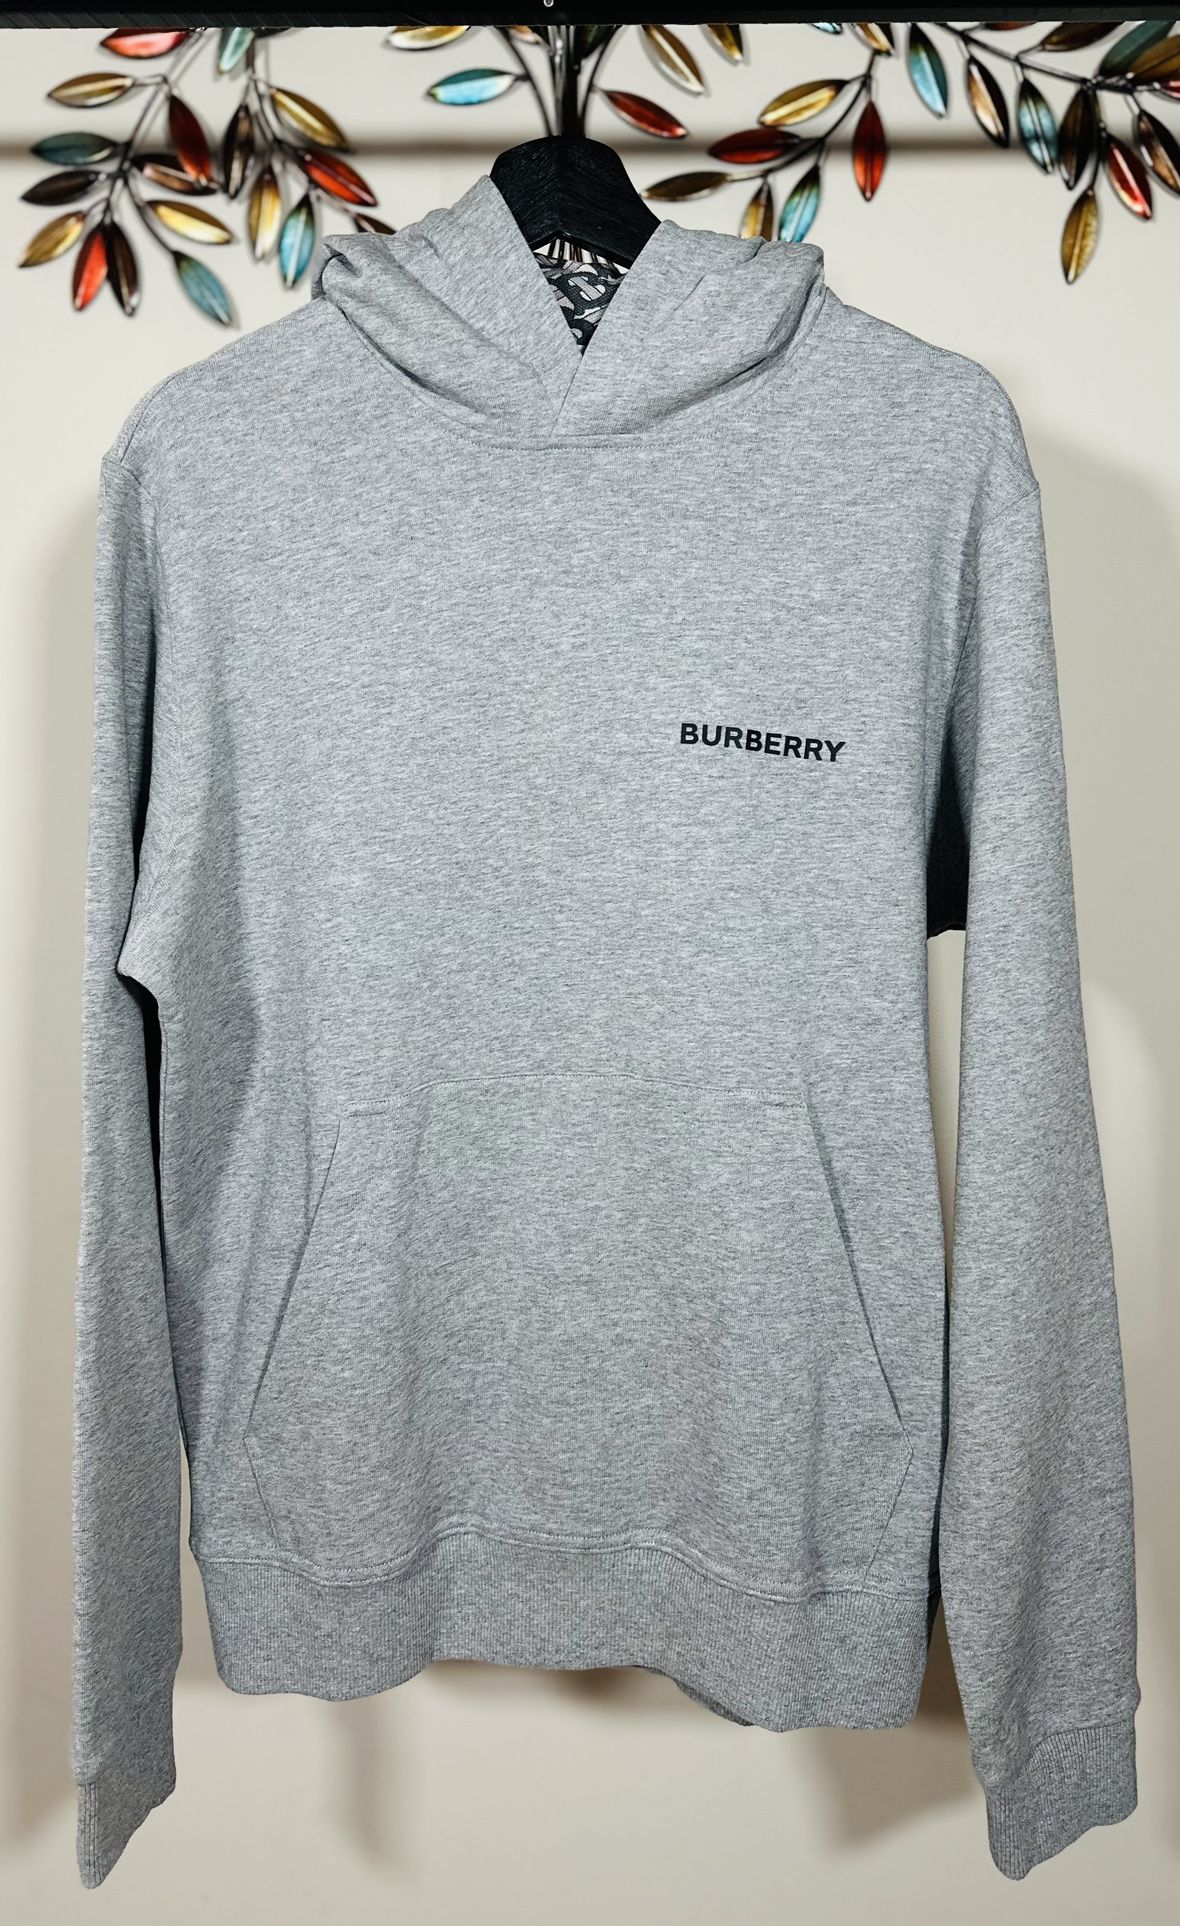 BURBERRY MONOGRAM TB GRAY HOODIE SS24, Visit Our Profile For More Items Available…